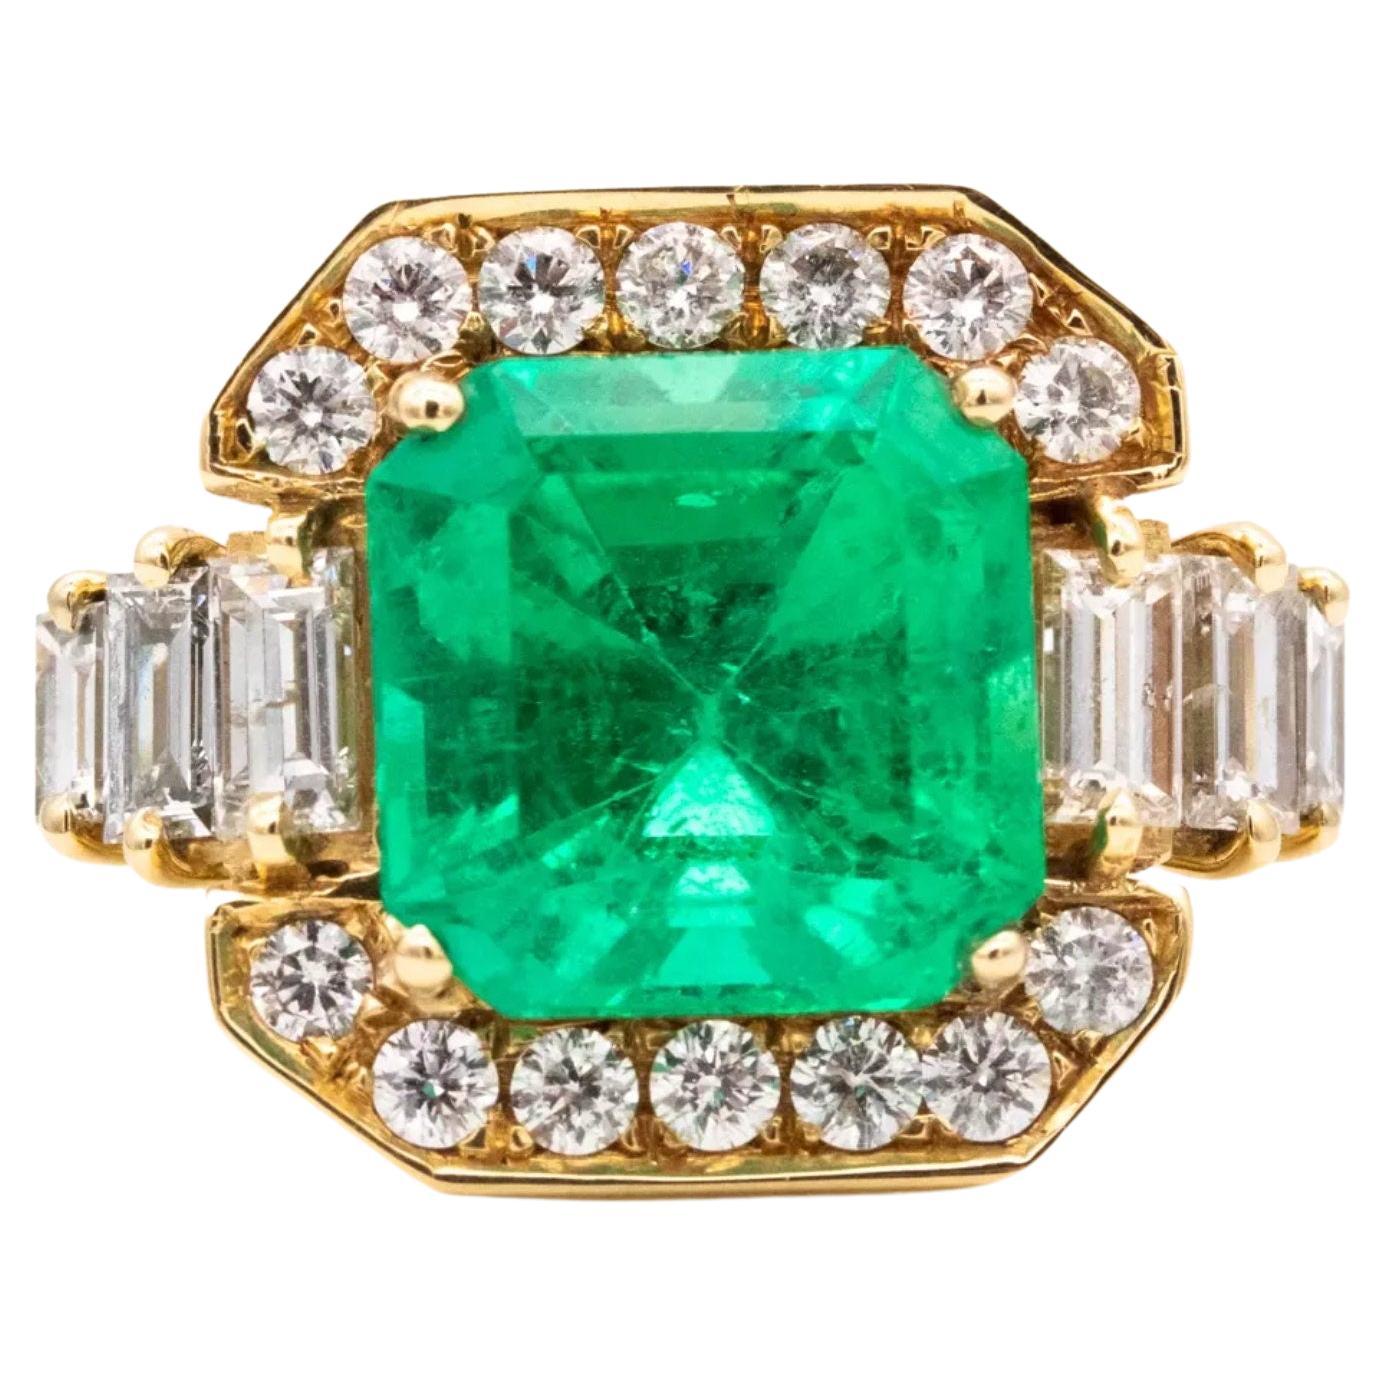 For Sale:  Certified 4.03 Carat Emerald Diamond Vintage Style Cocktail Ring in 18K Gold